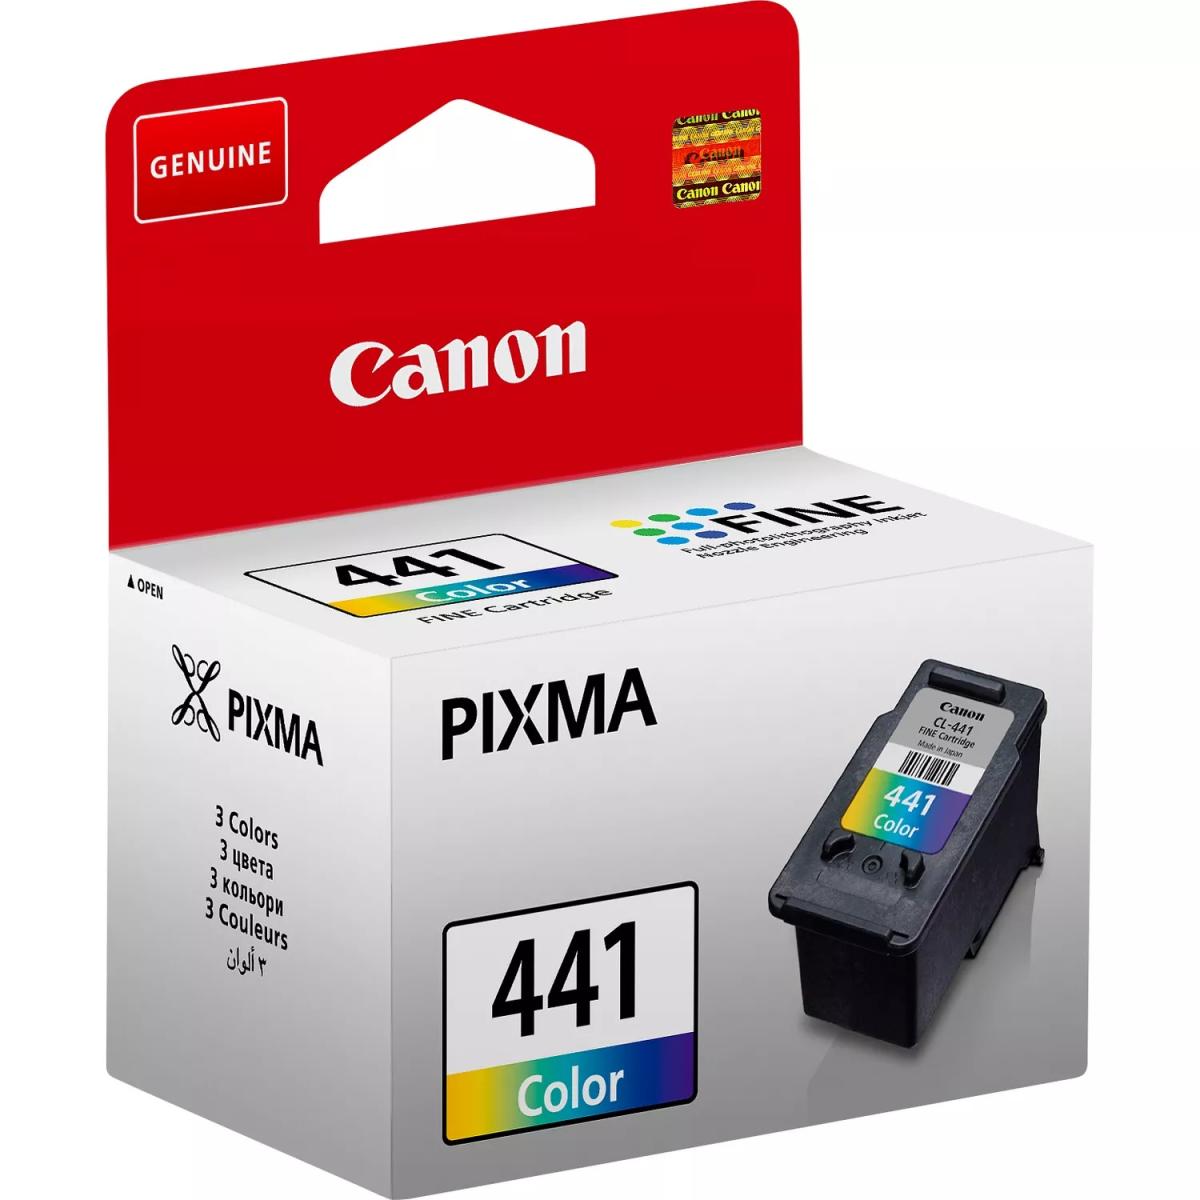 Canon CL-441 Color Ink Cartridge EMB